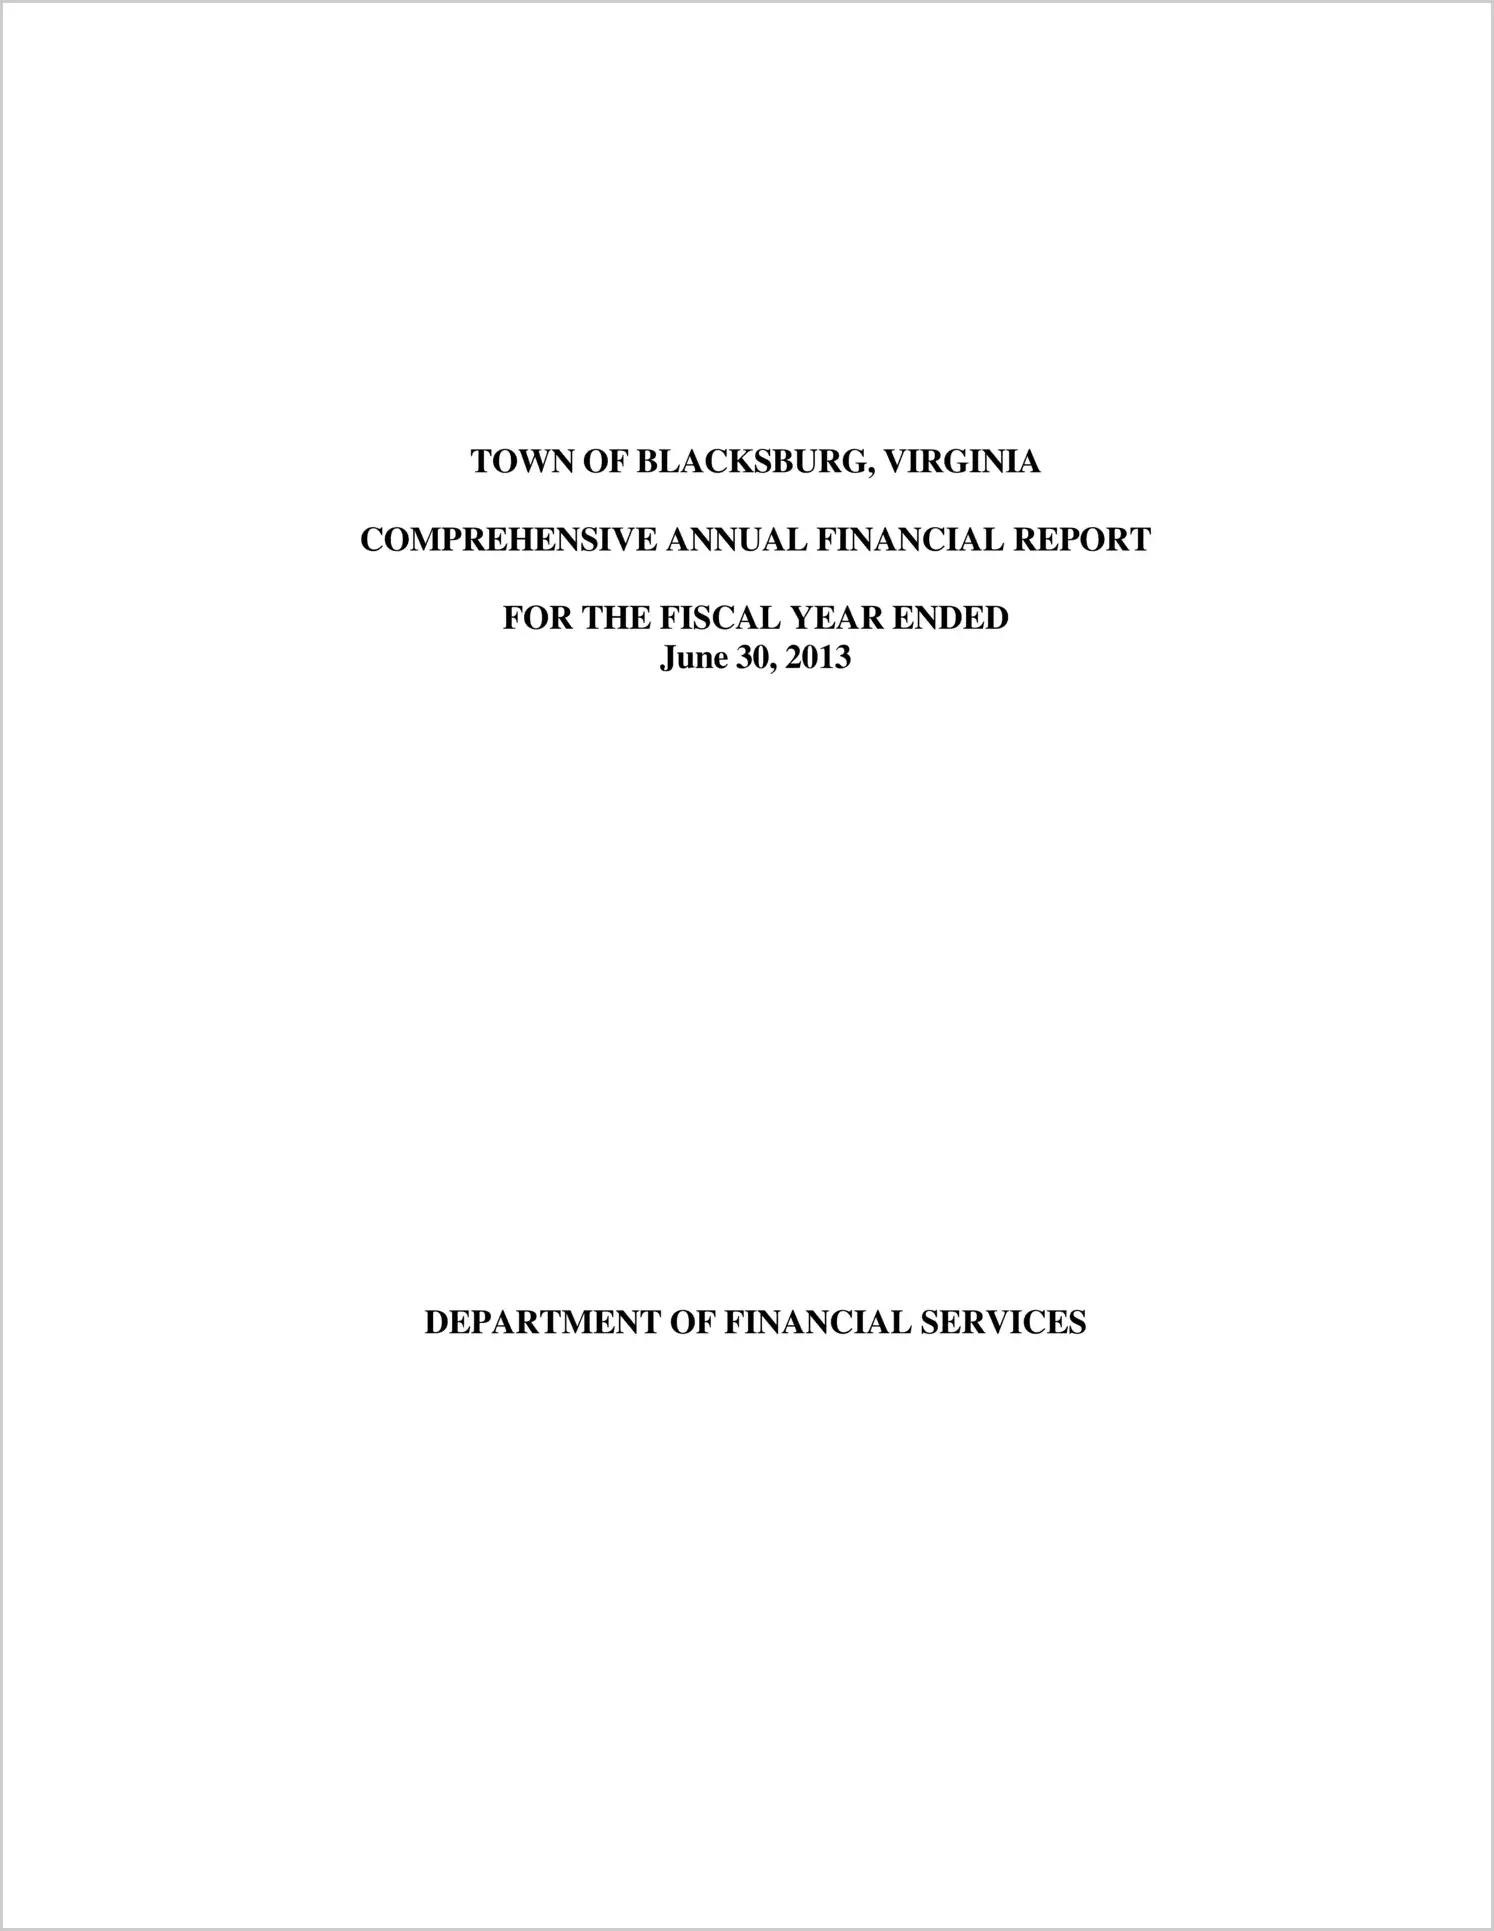 2013 Annual Financial Report for Town of Blacksburg